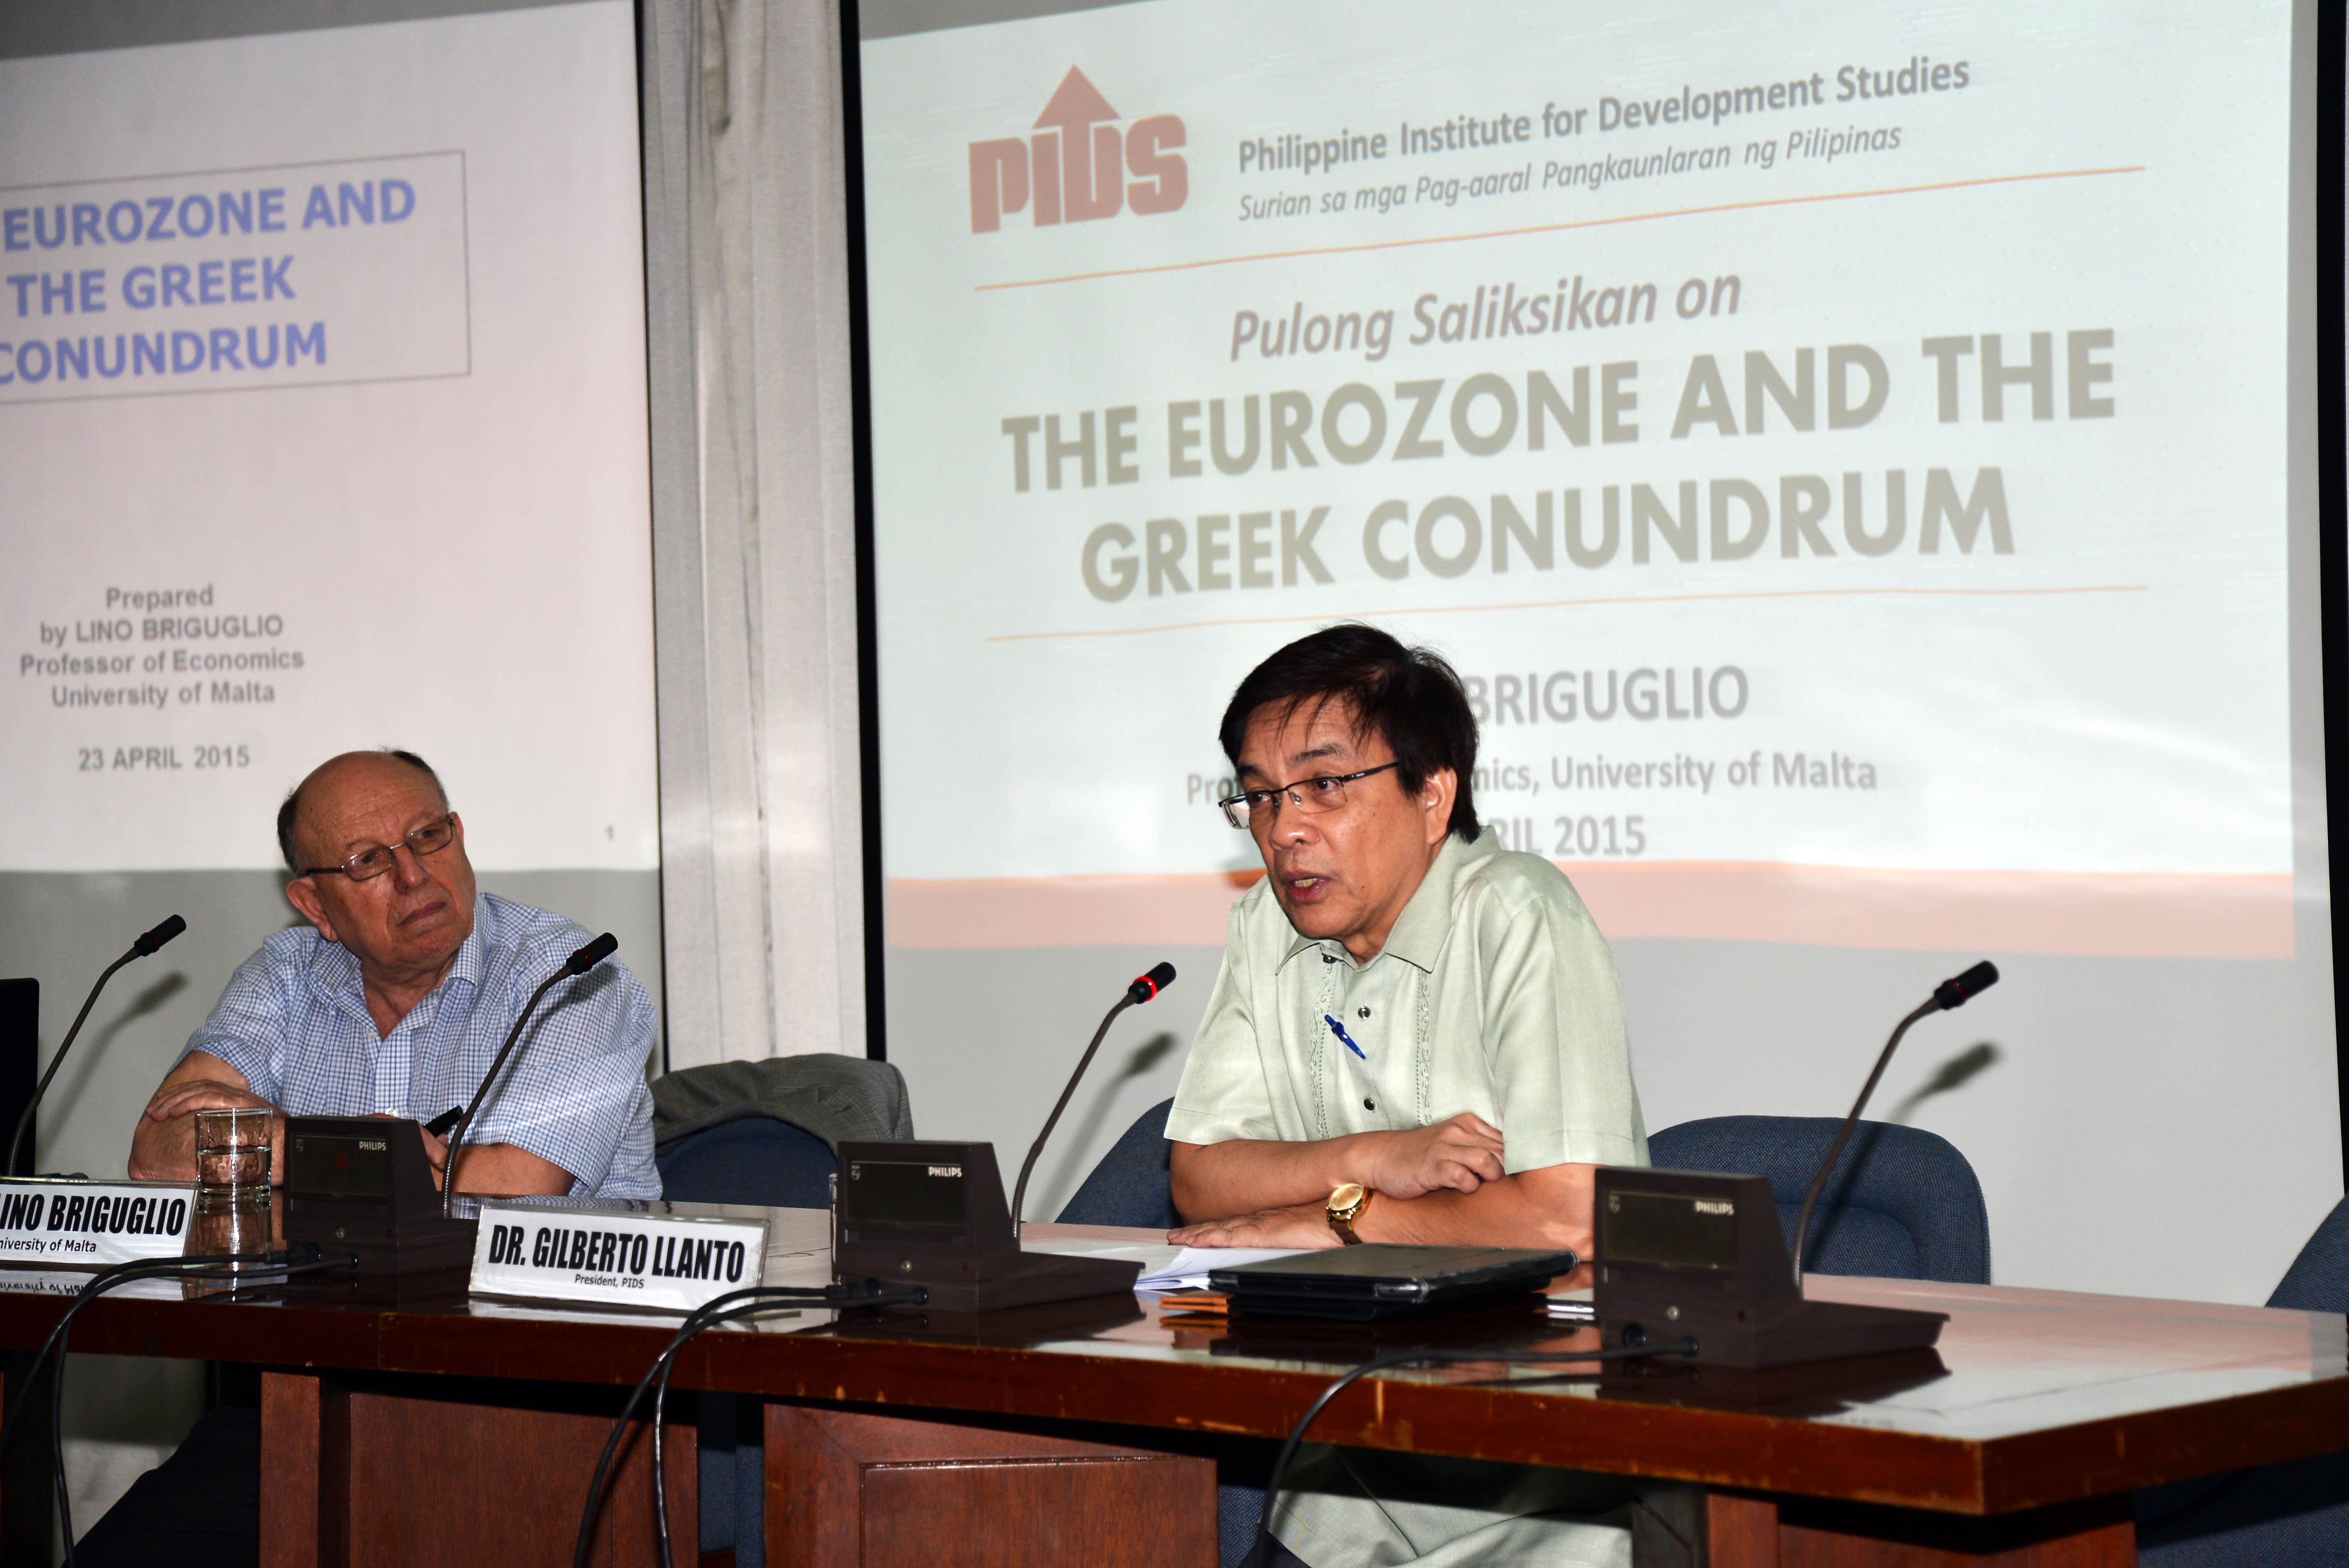 Pulong Saliksikan On The Eurozone And The Greek Conundrum-DSC_1260.jpg